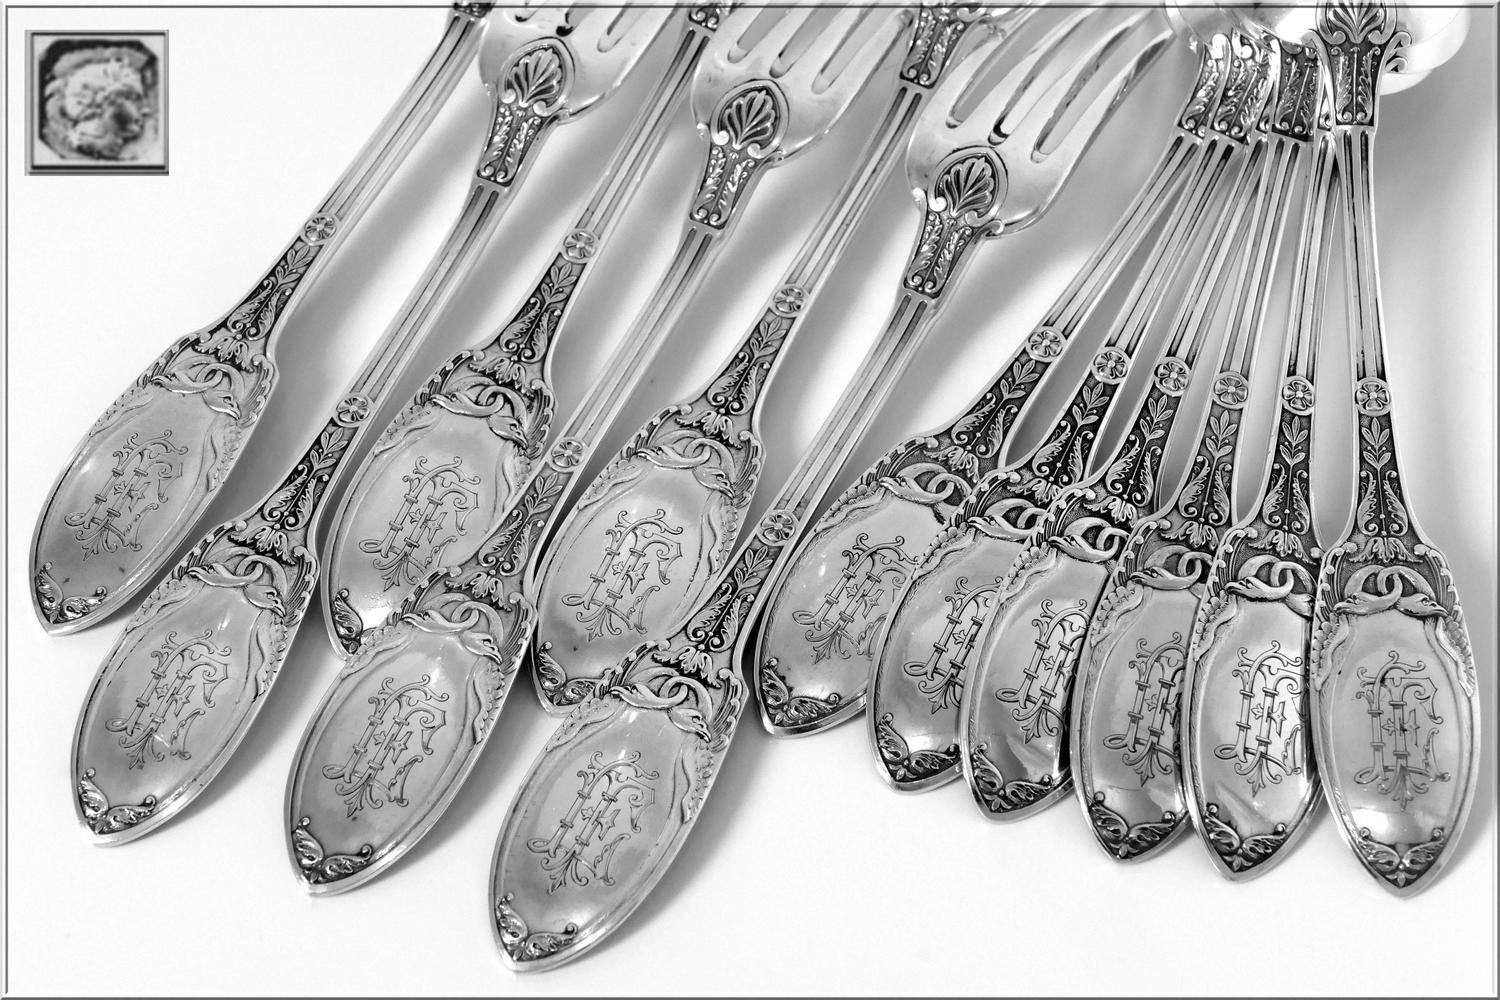 Early 20th Century Combeau Rare French Sterling Silver Dinner Flatware Set 12 Piece Empire, Swans